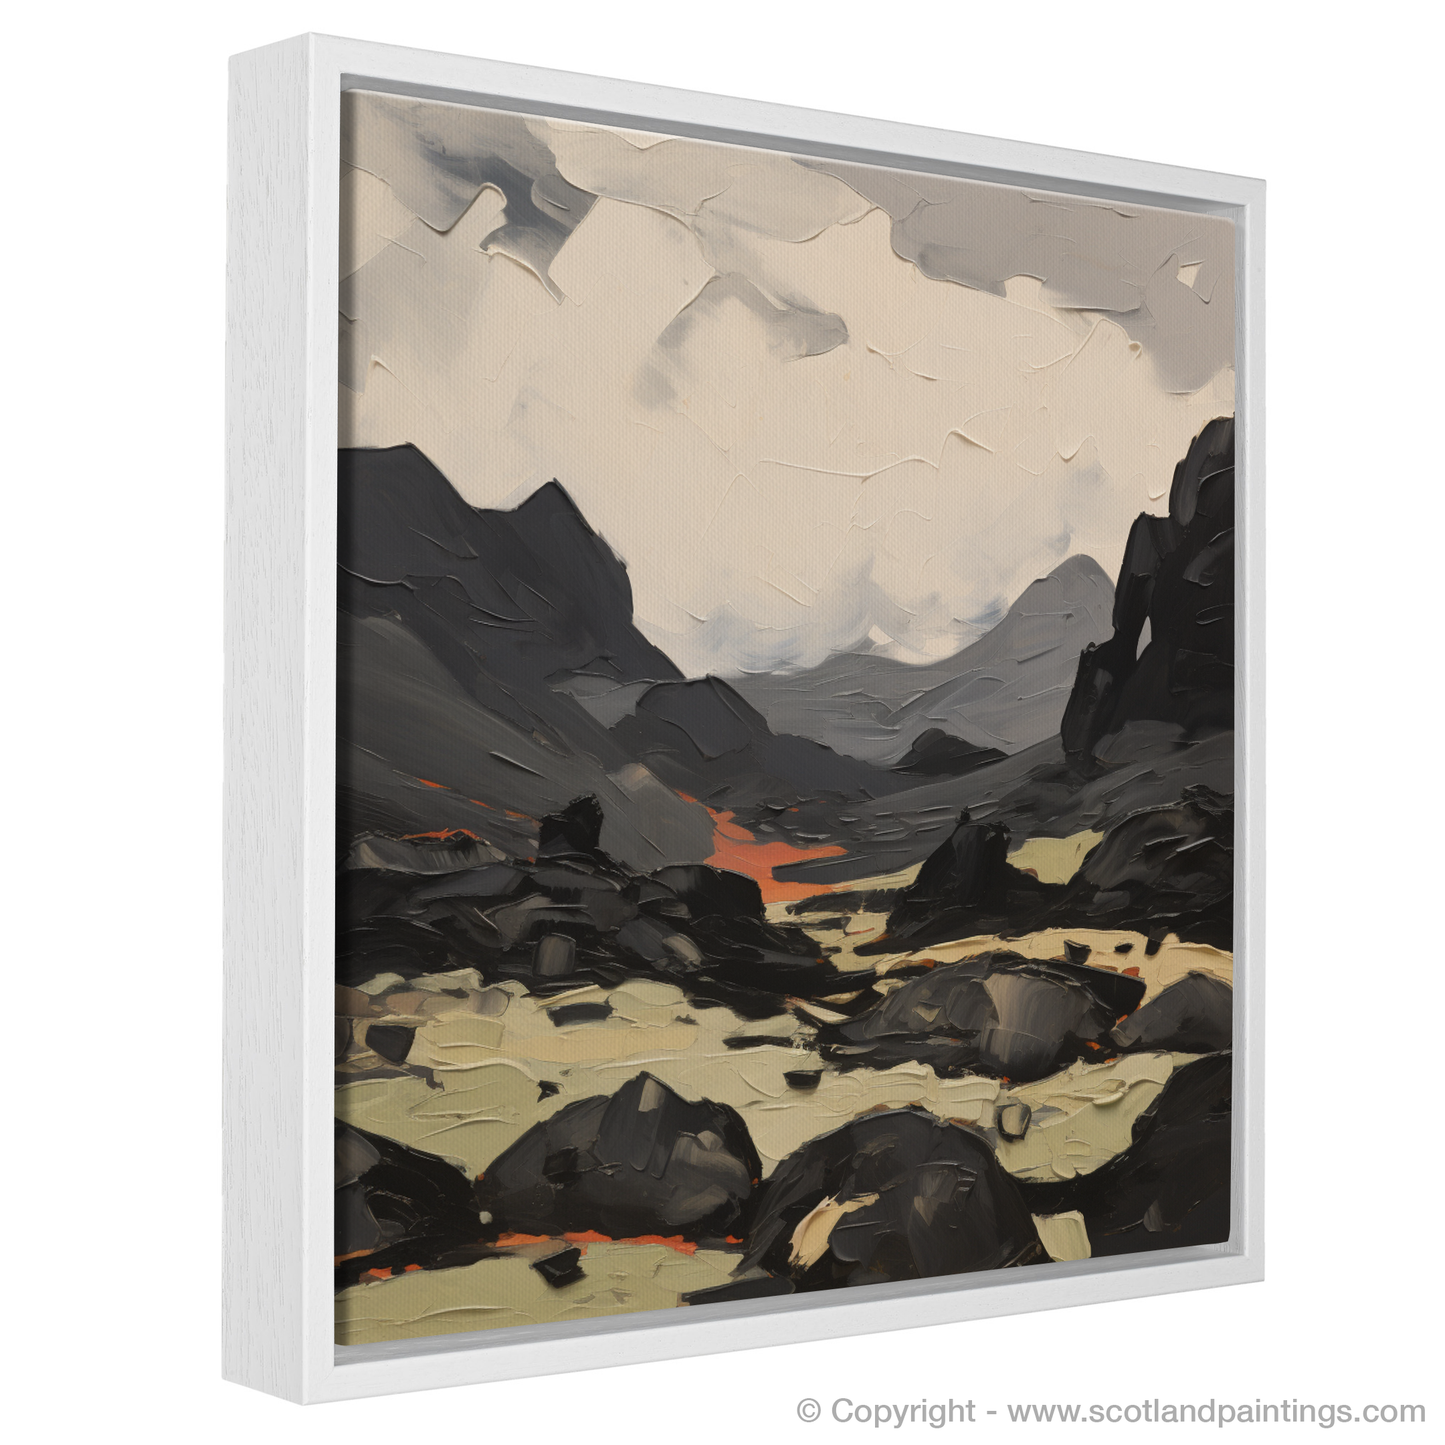 Painting and Art Print of Càrn an Tuirc entitled "Majesty of the Scottish Munros: A Carn an Tuirc Expression".